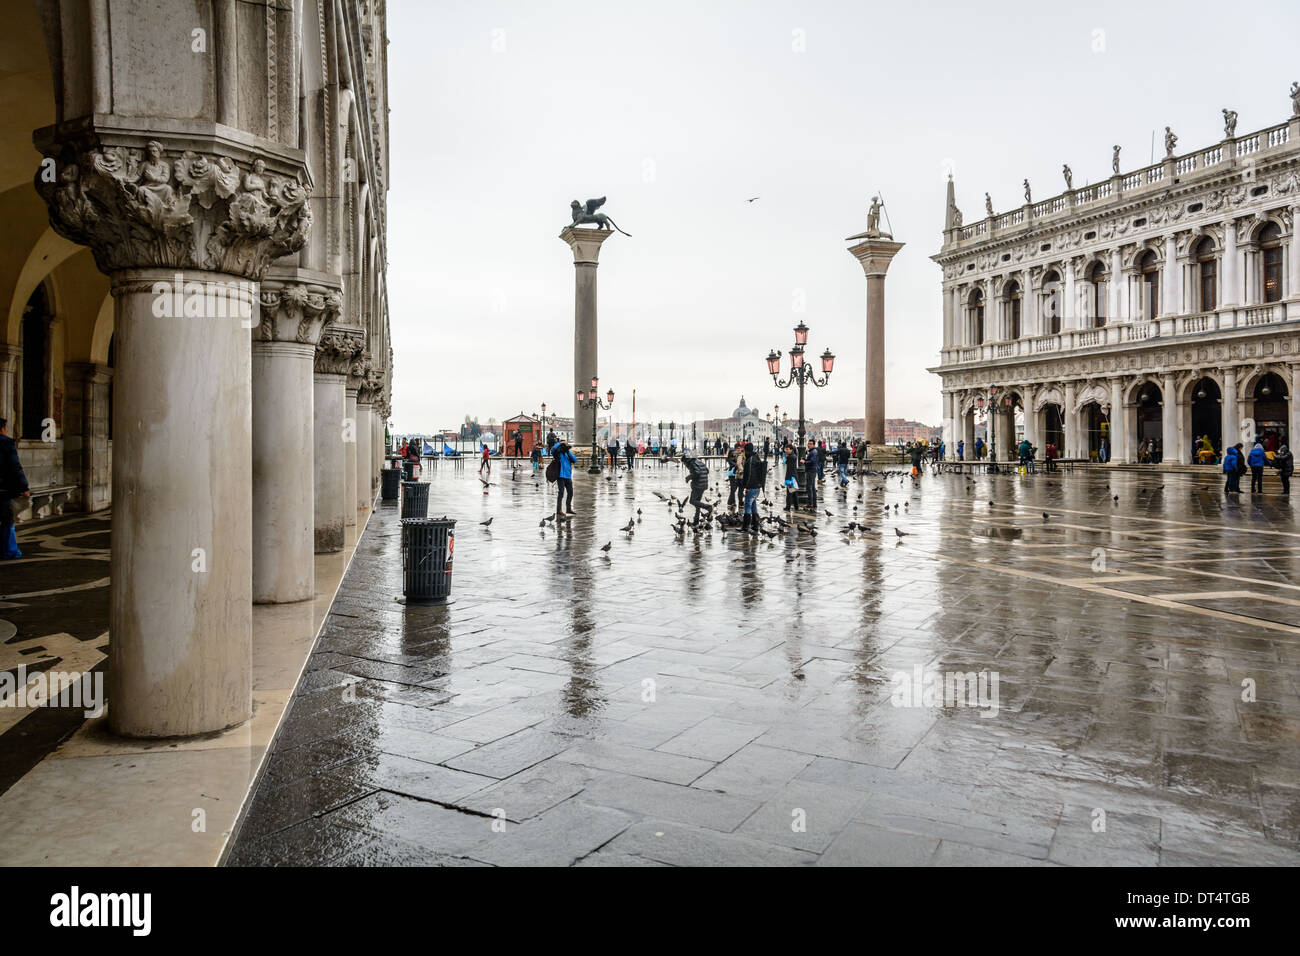 Venice, Italy. View over the Piazzetta di San Marco with two columns and tourists in rainwear feeding pigeons on a rainy day. Stock Photo